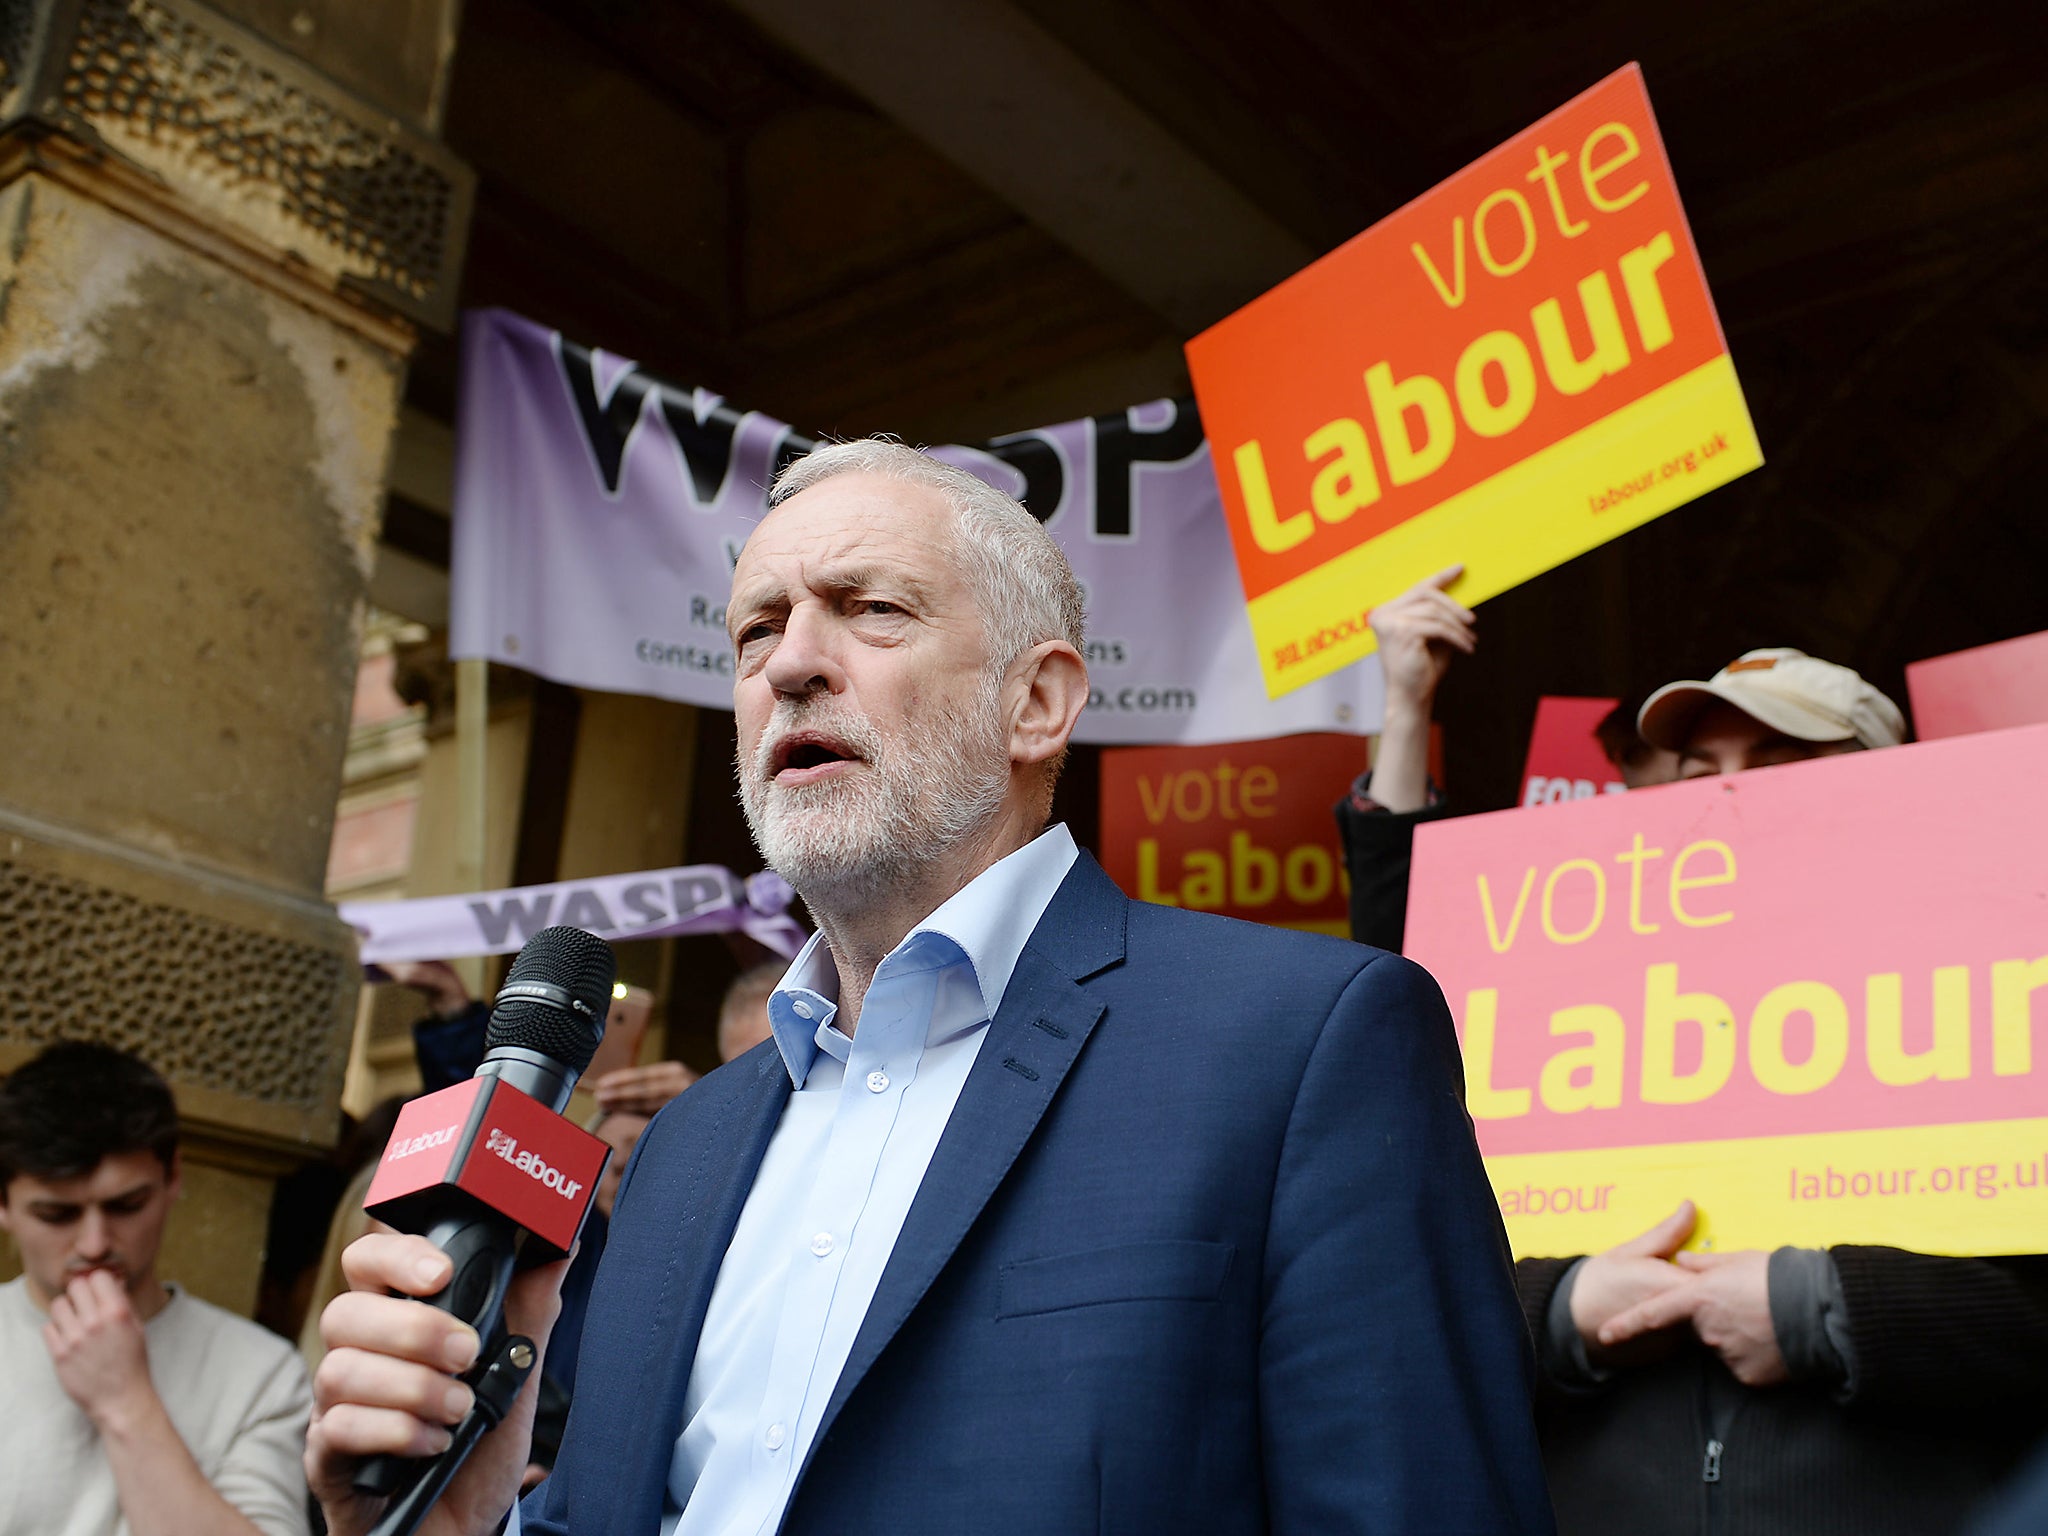 The Labour leader officially launched his party's election campaign on Tuesday with an impressive speech, but is it all too little, too late?